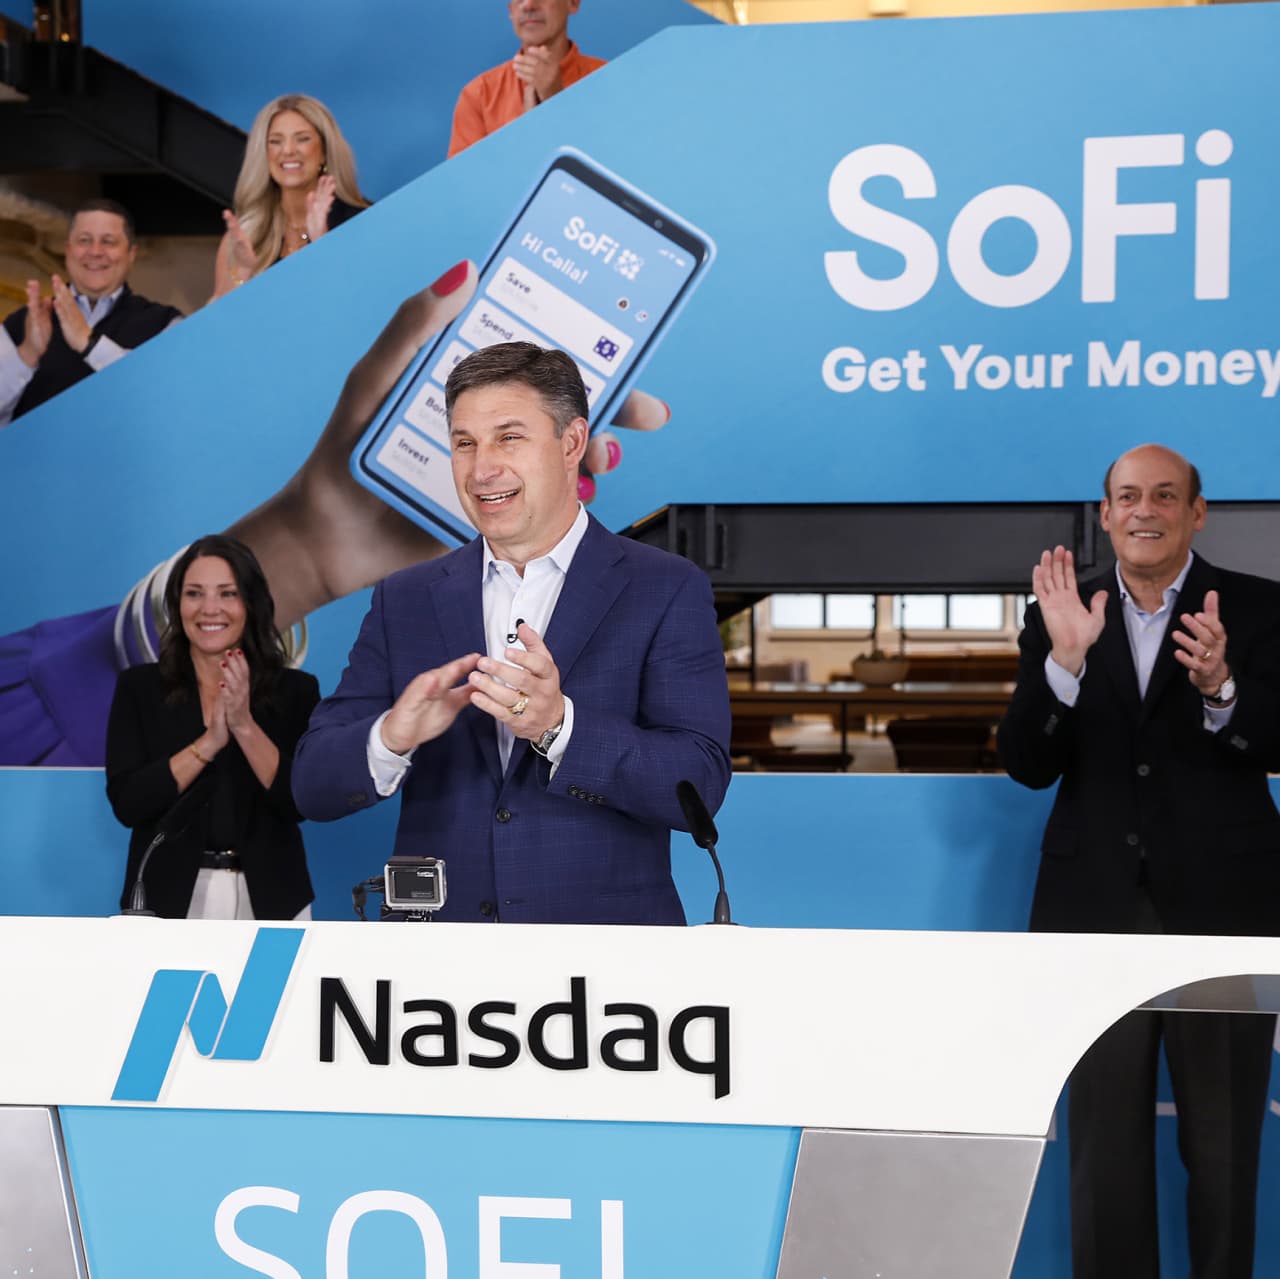 SoFi stock soars after company gains approval for bank charter — 'a major step forward' - MarketWatch